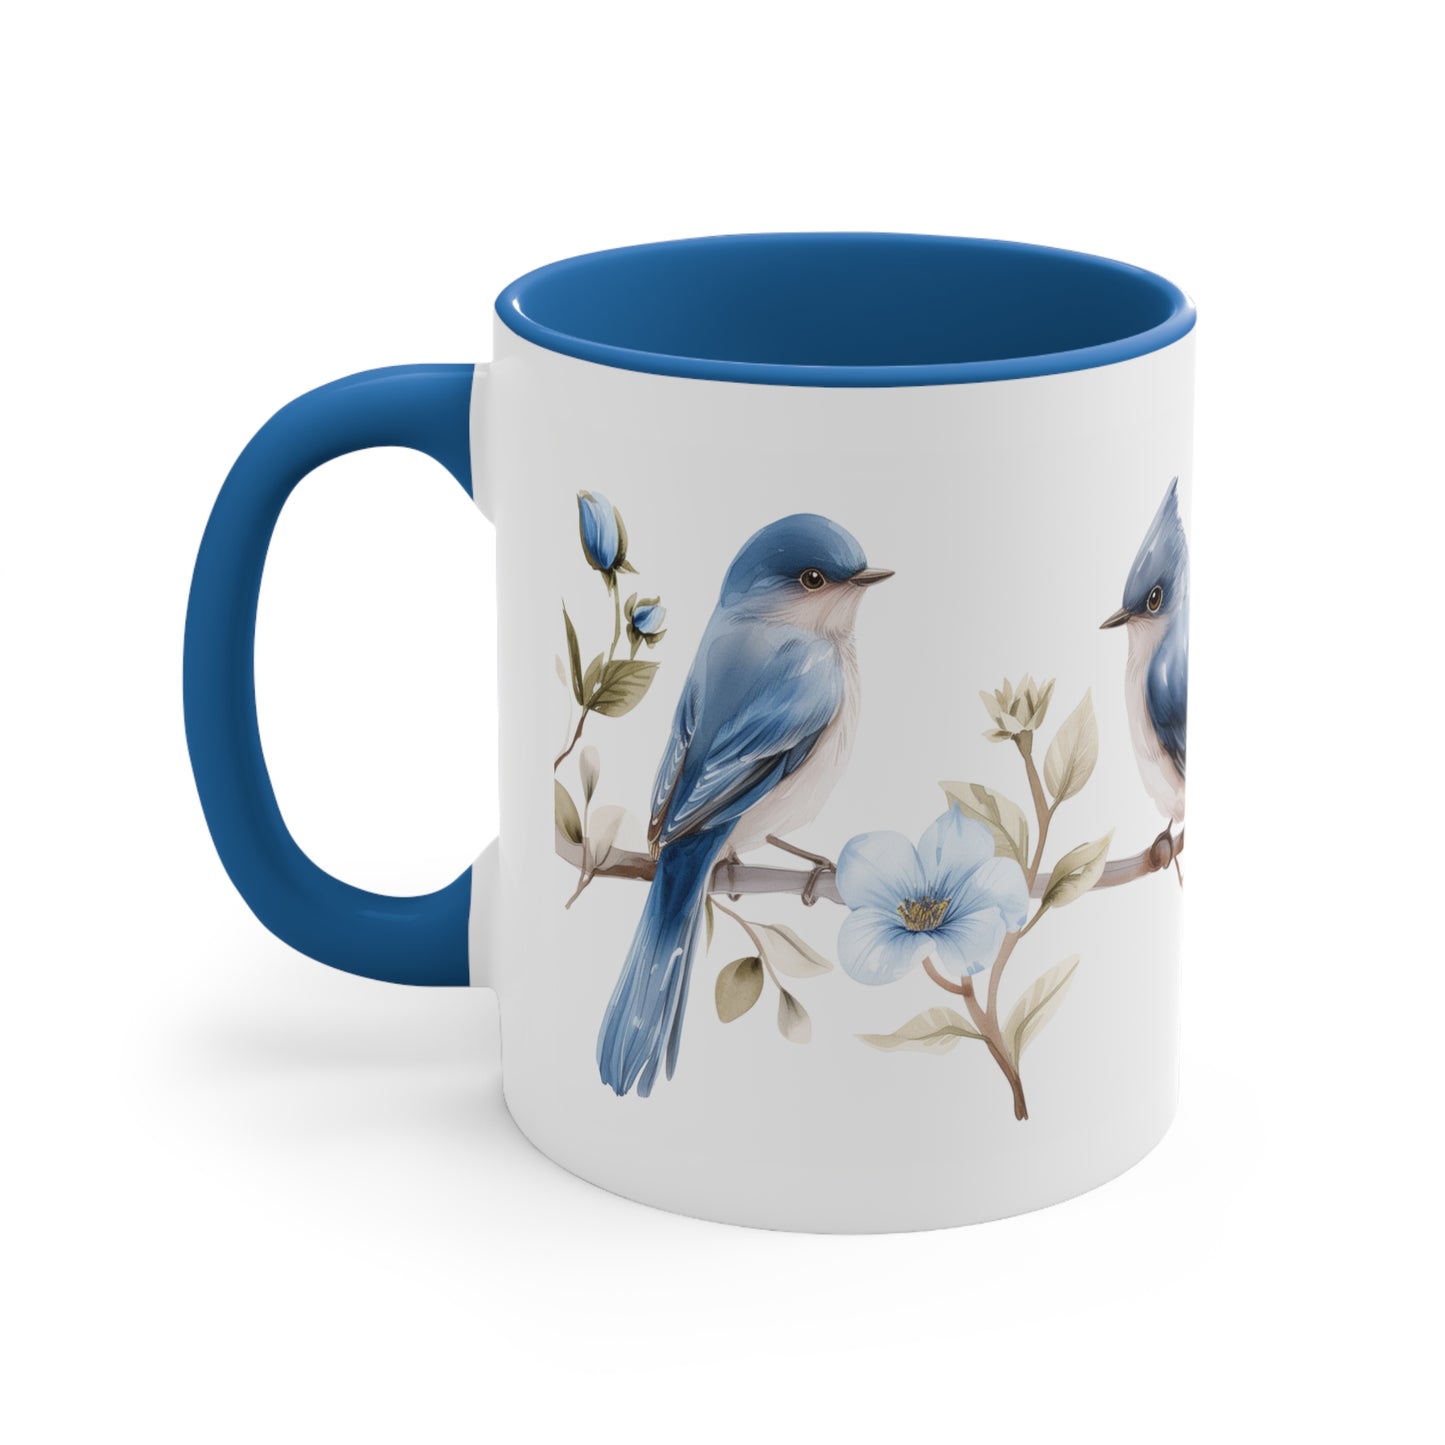 Blue Birds Coffee Mug, White Watercolor Flowers Art Ceramic Cup Tea Hot Chocolate Lover Unique Microwave Safe Novelty Cool Gift